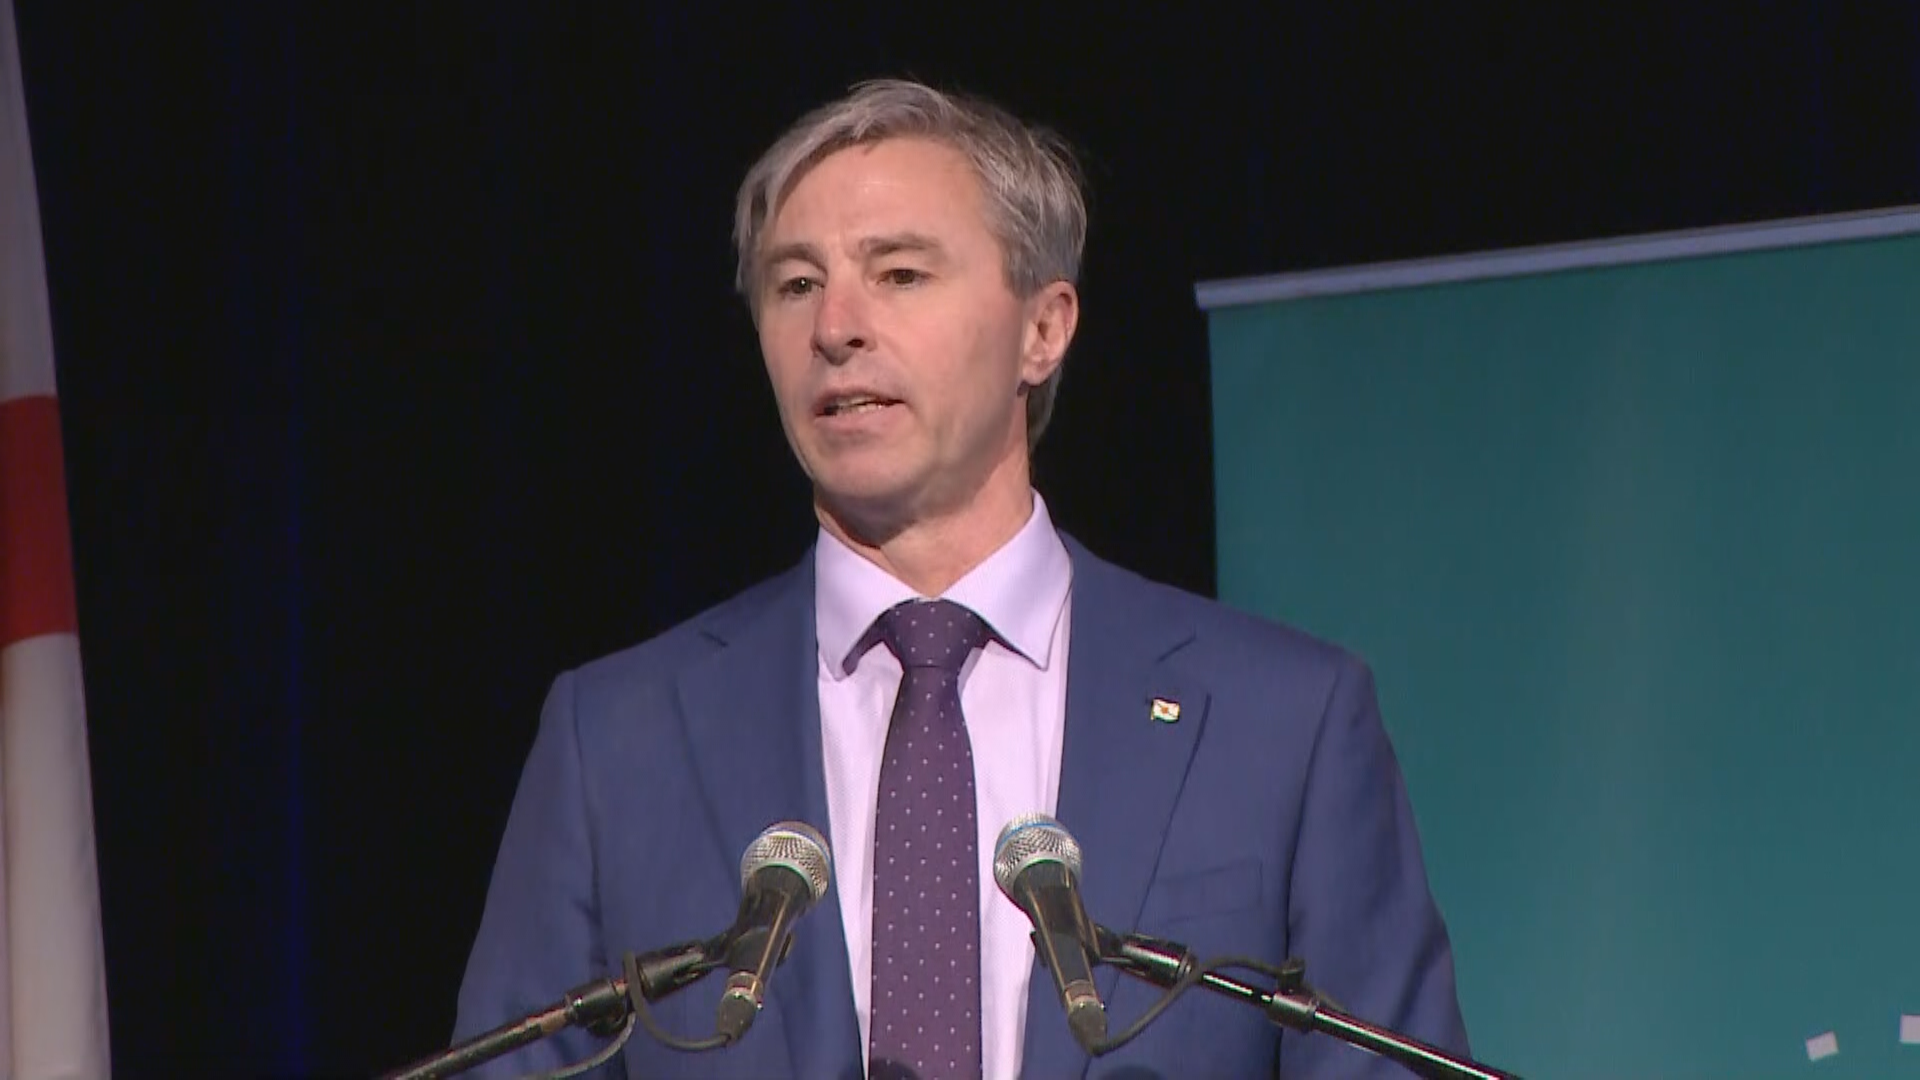 Medical school ‘finally’ coming to Cape Breton by fall 2025: N.S. premier